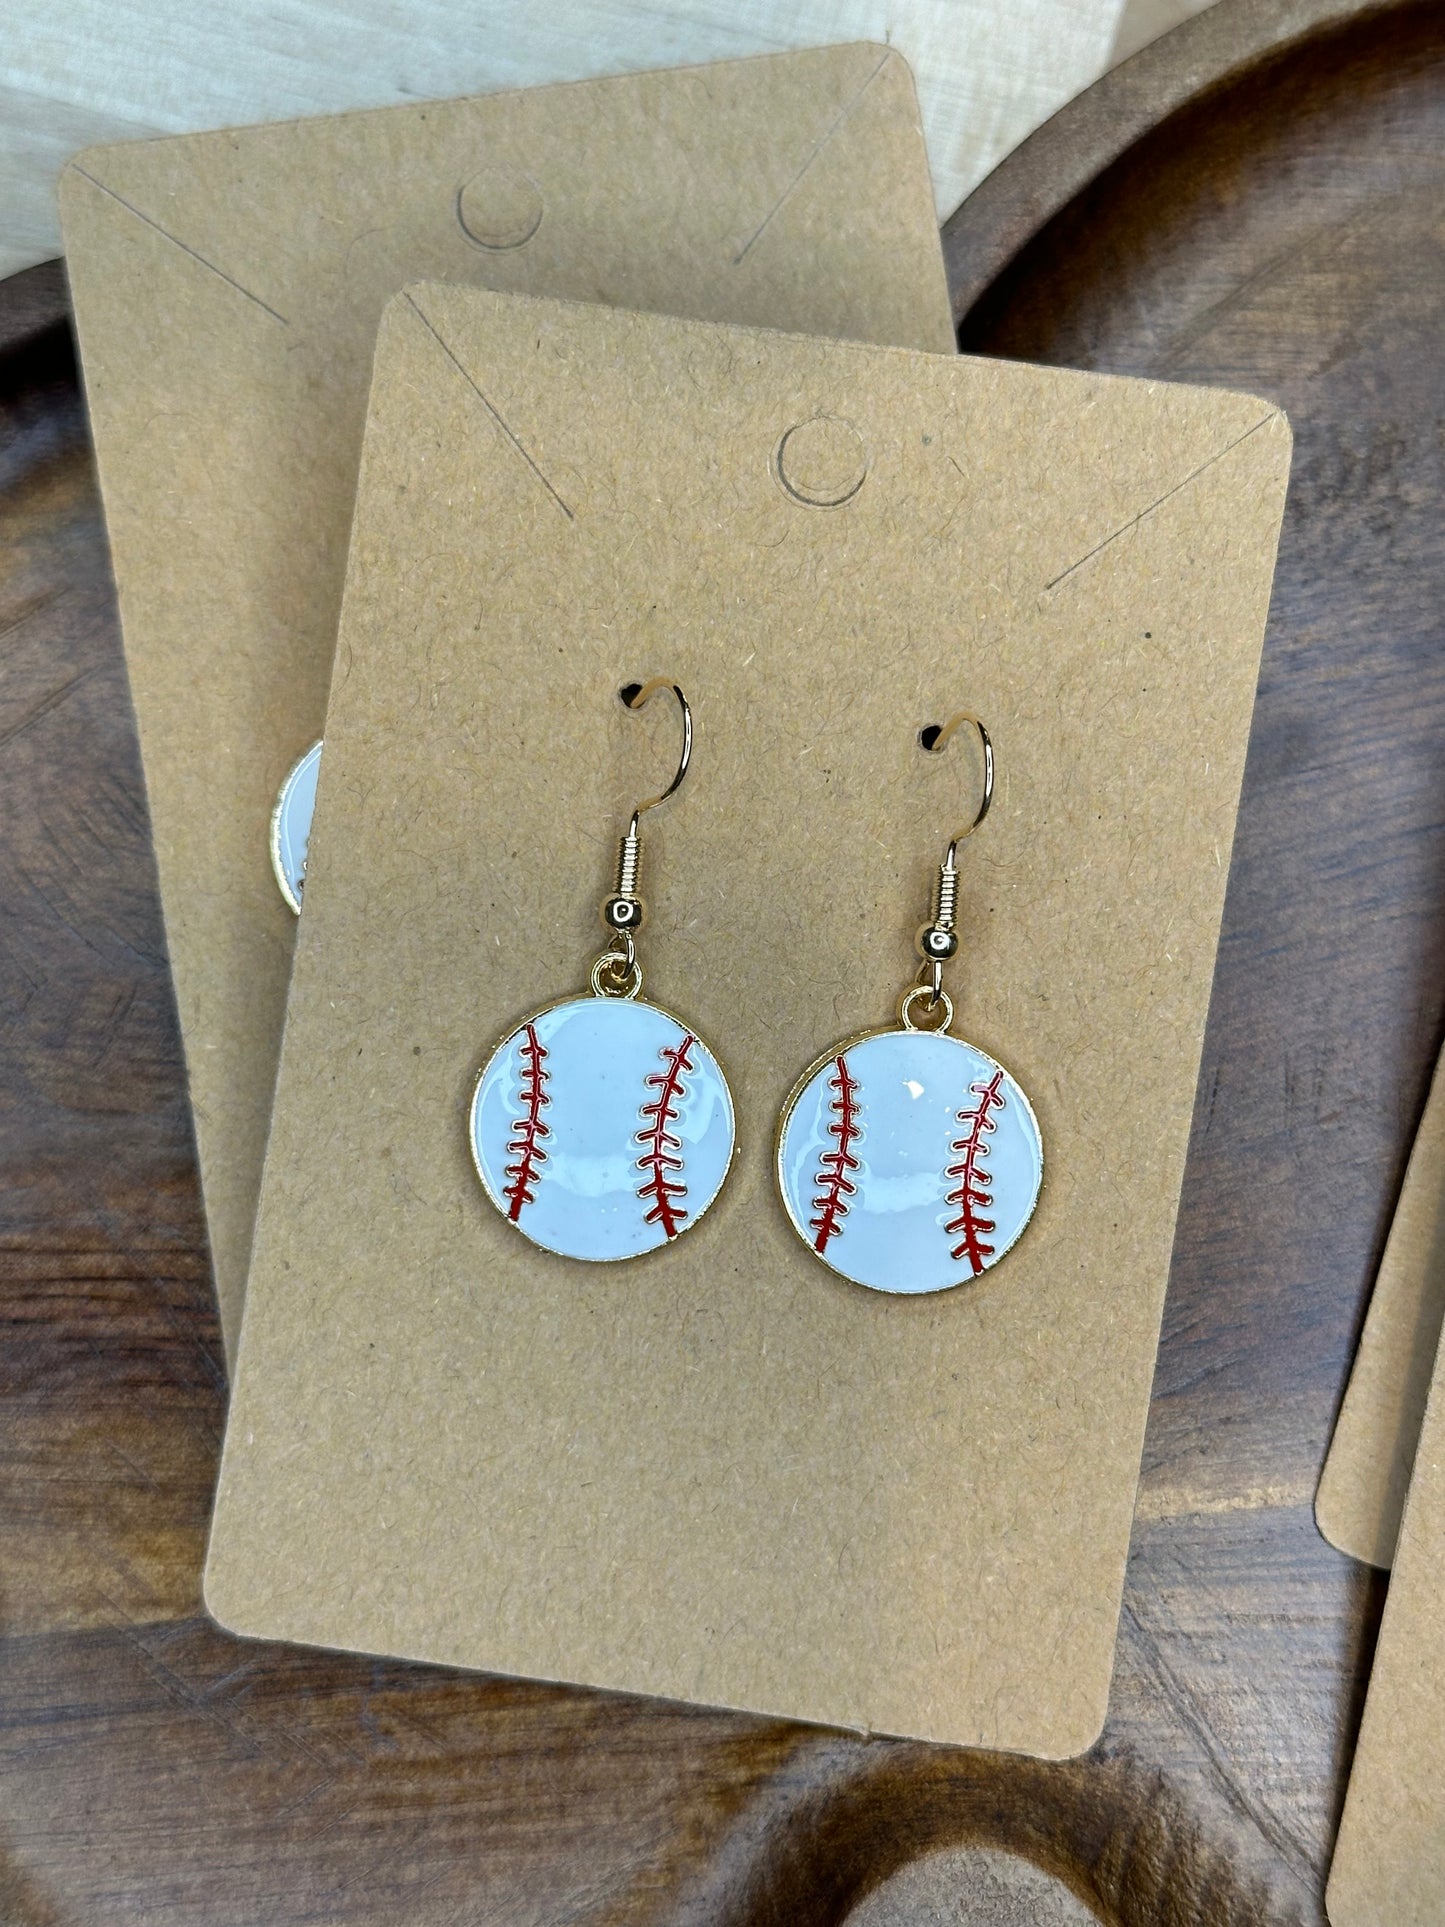 First Pitch Earrings